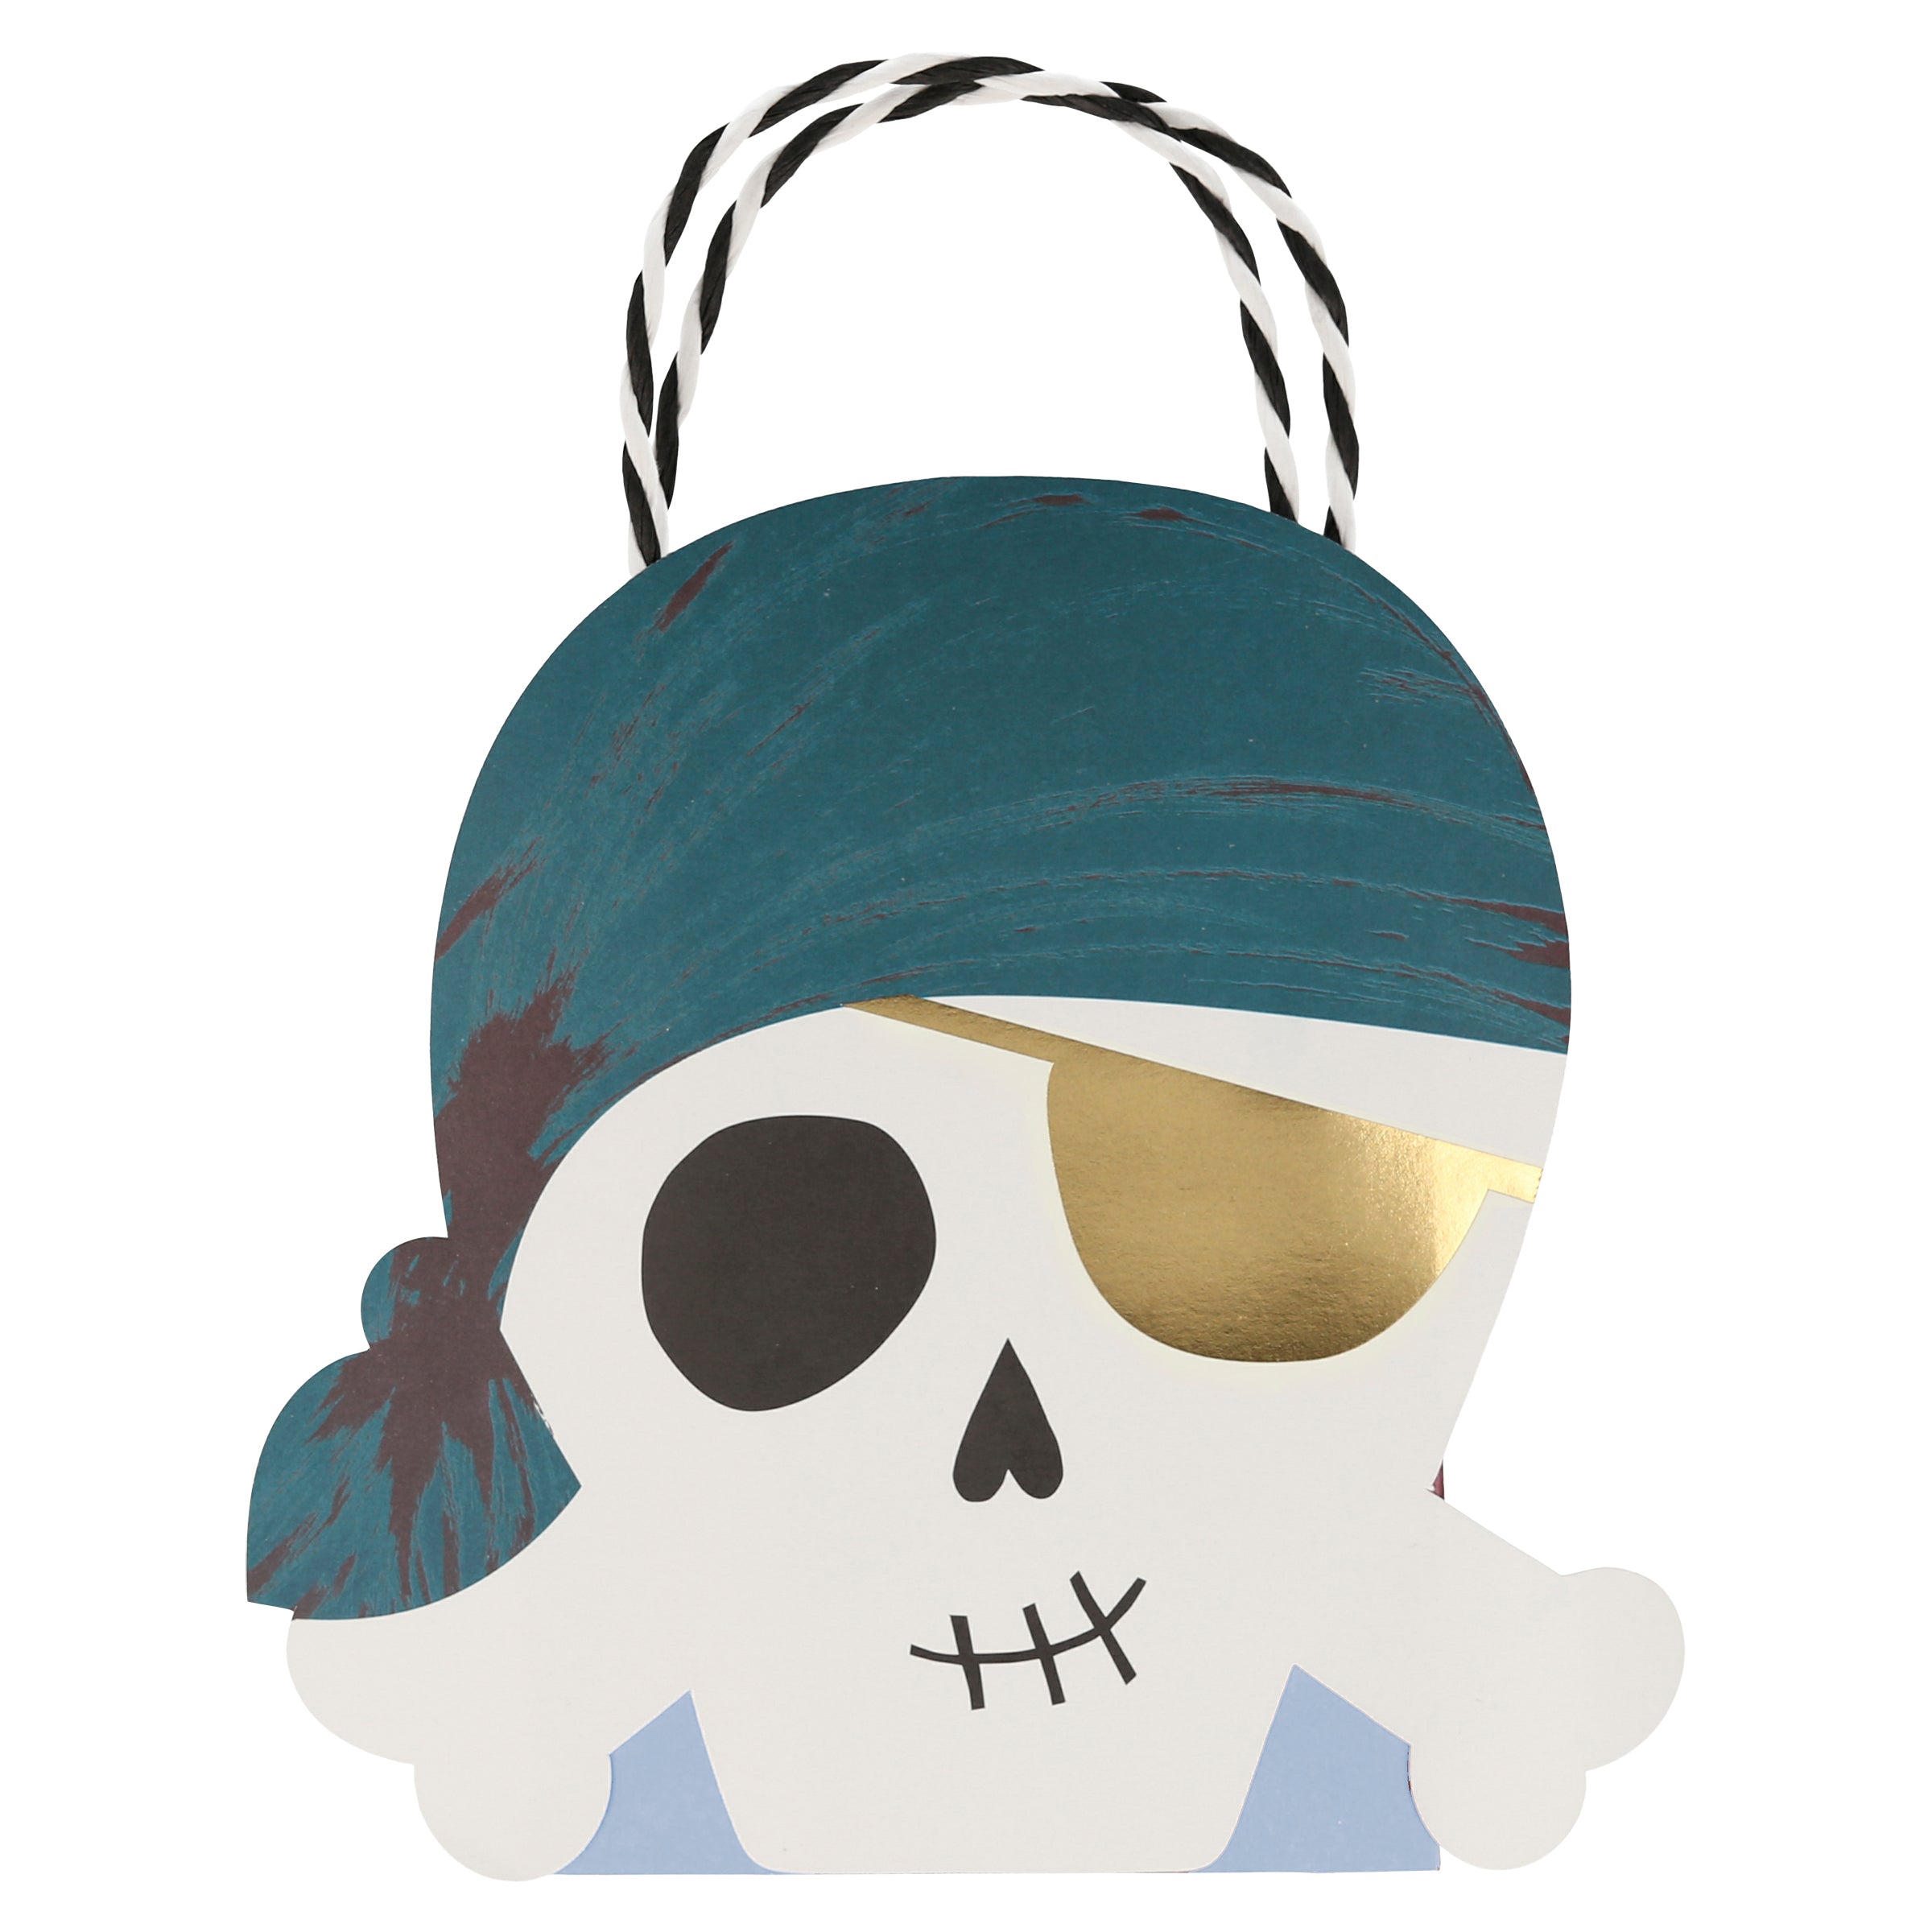 Our paper party bags, with pirate skulls, are perfect for a pirate theme party.